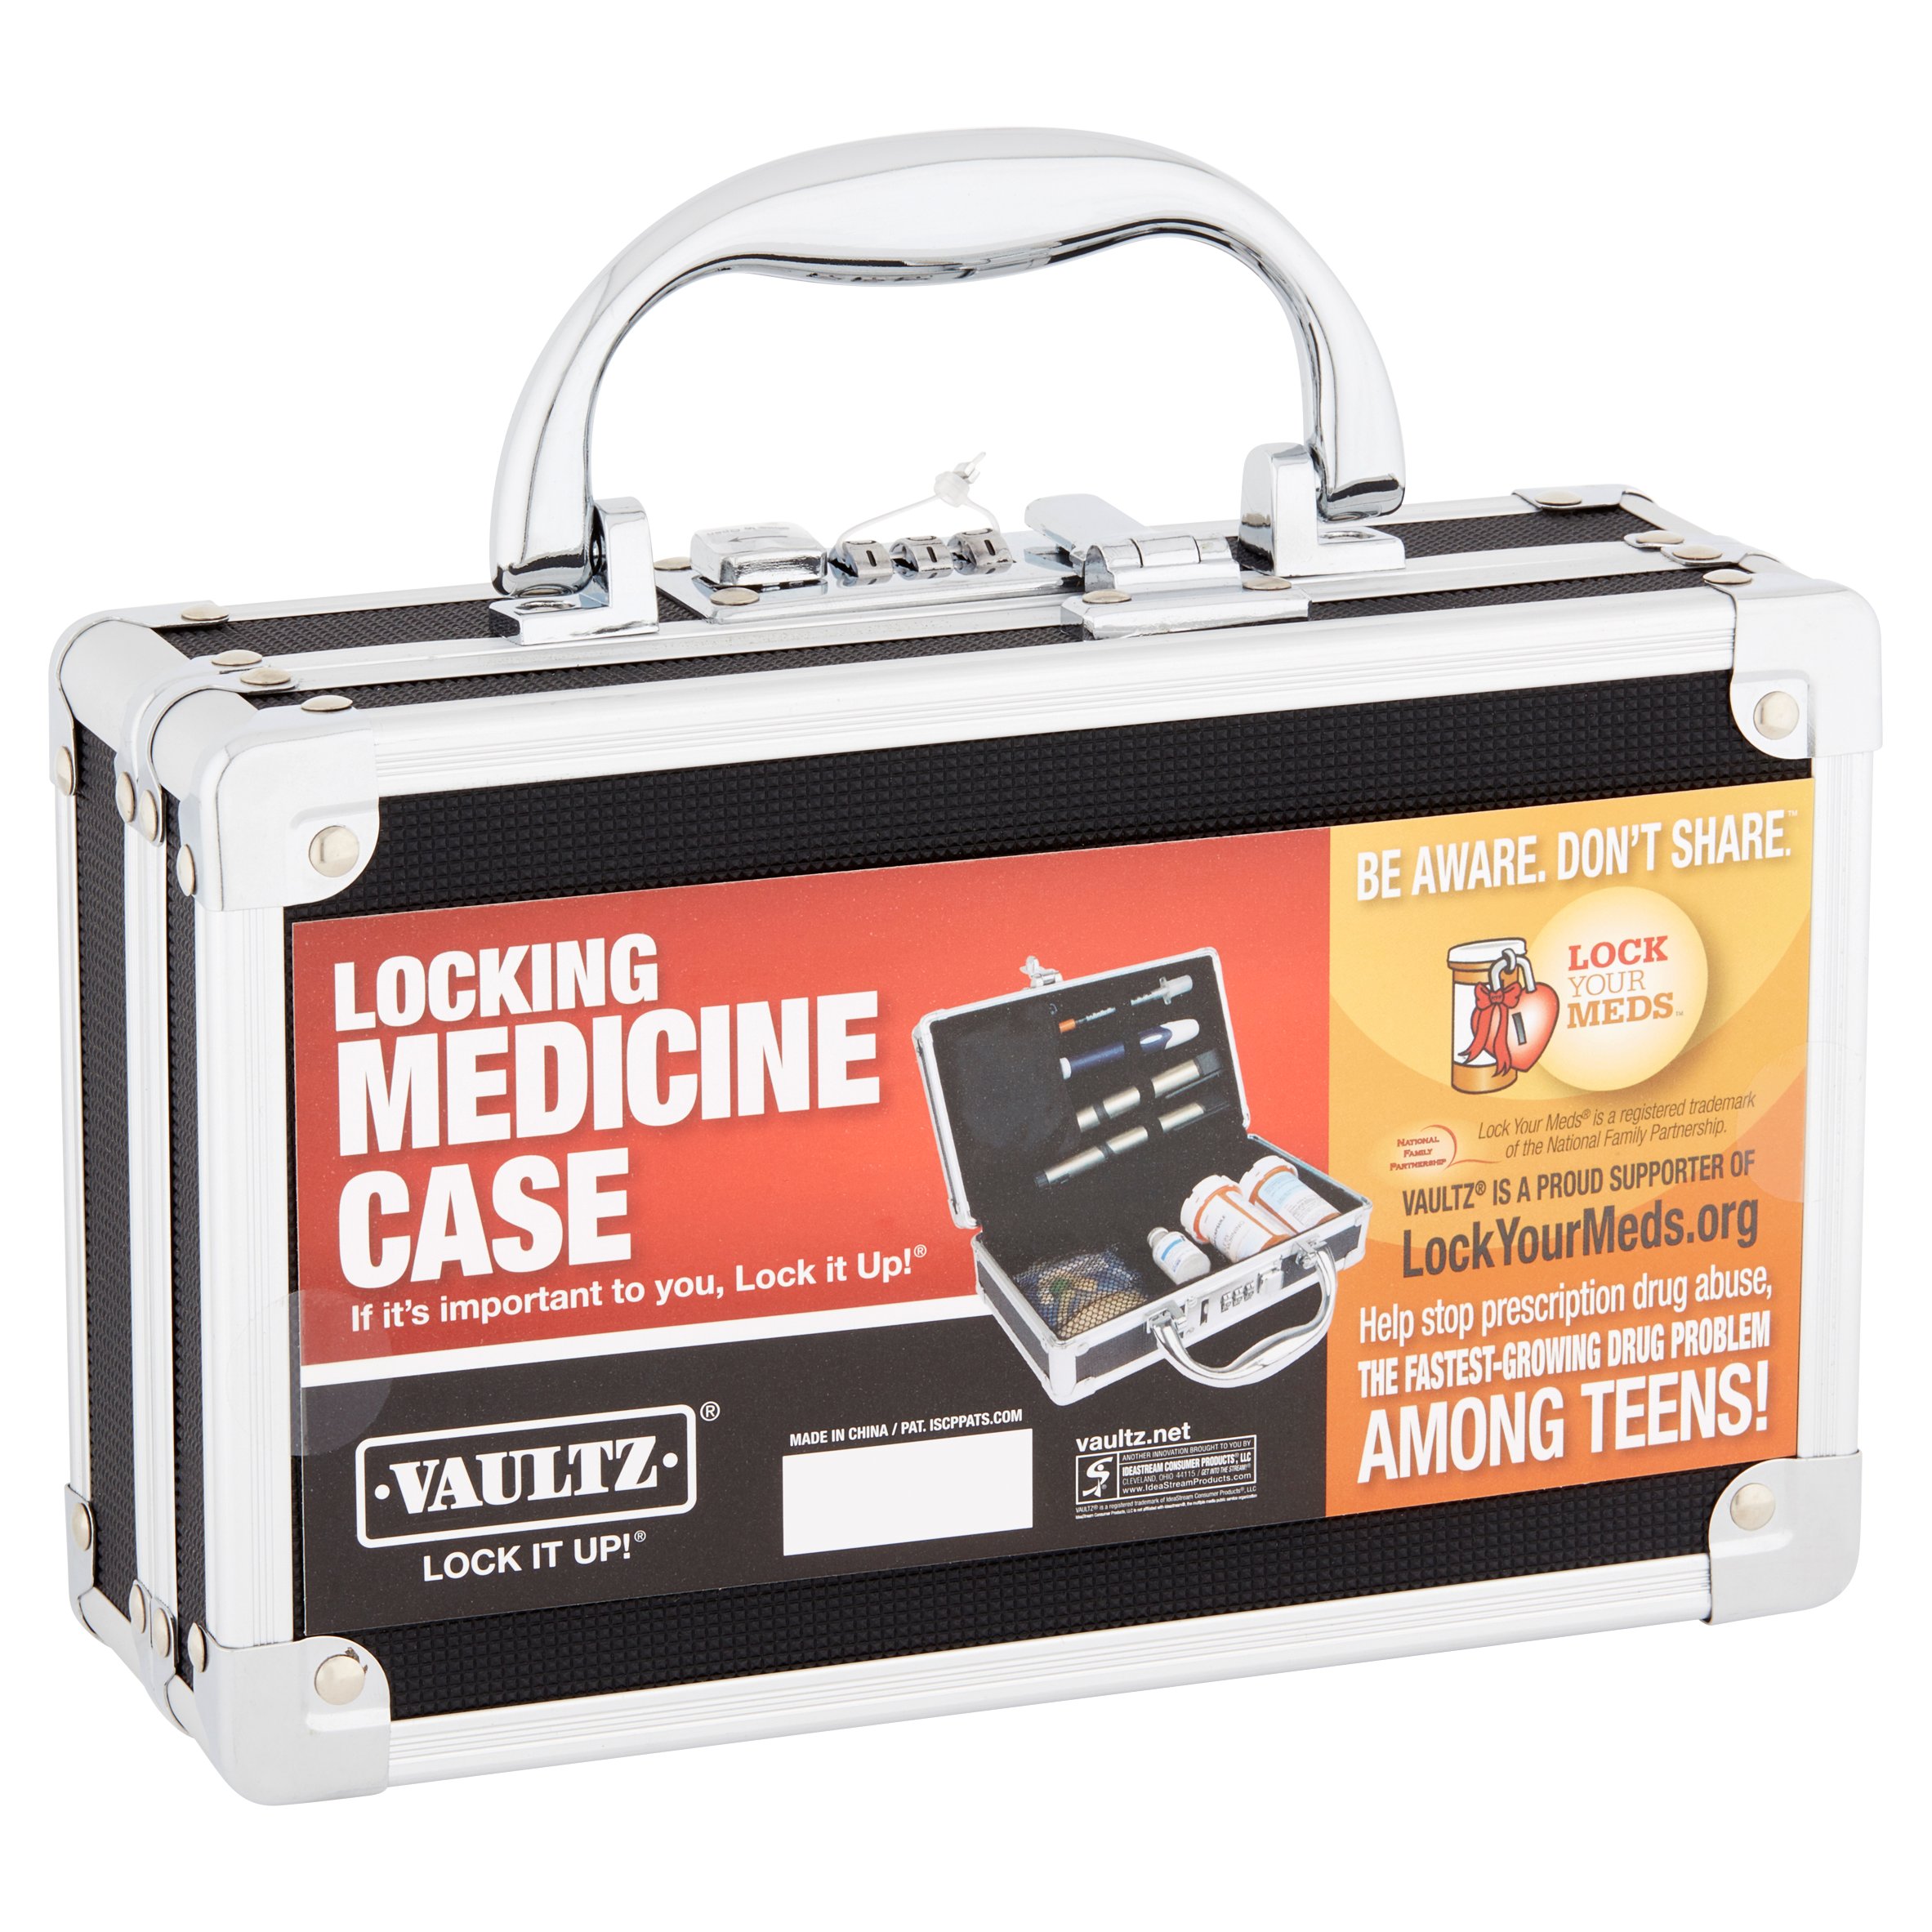 Vaultz Locking Medicine Case by IdeaStream Consumer Products - Safe And Secure Pill Organizer, VZ00361 - image 4 of 8